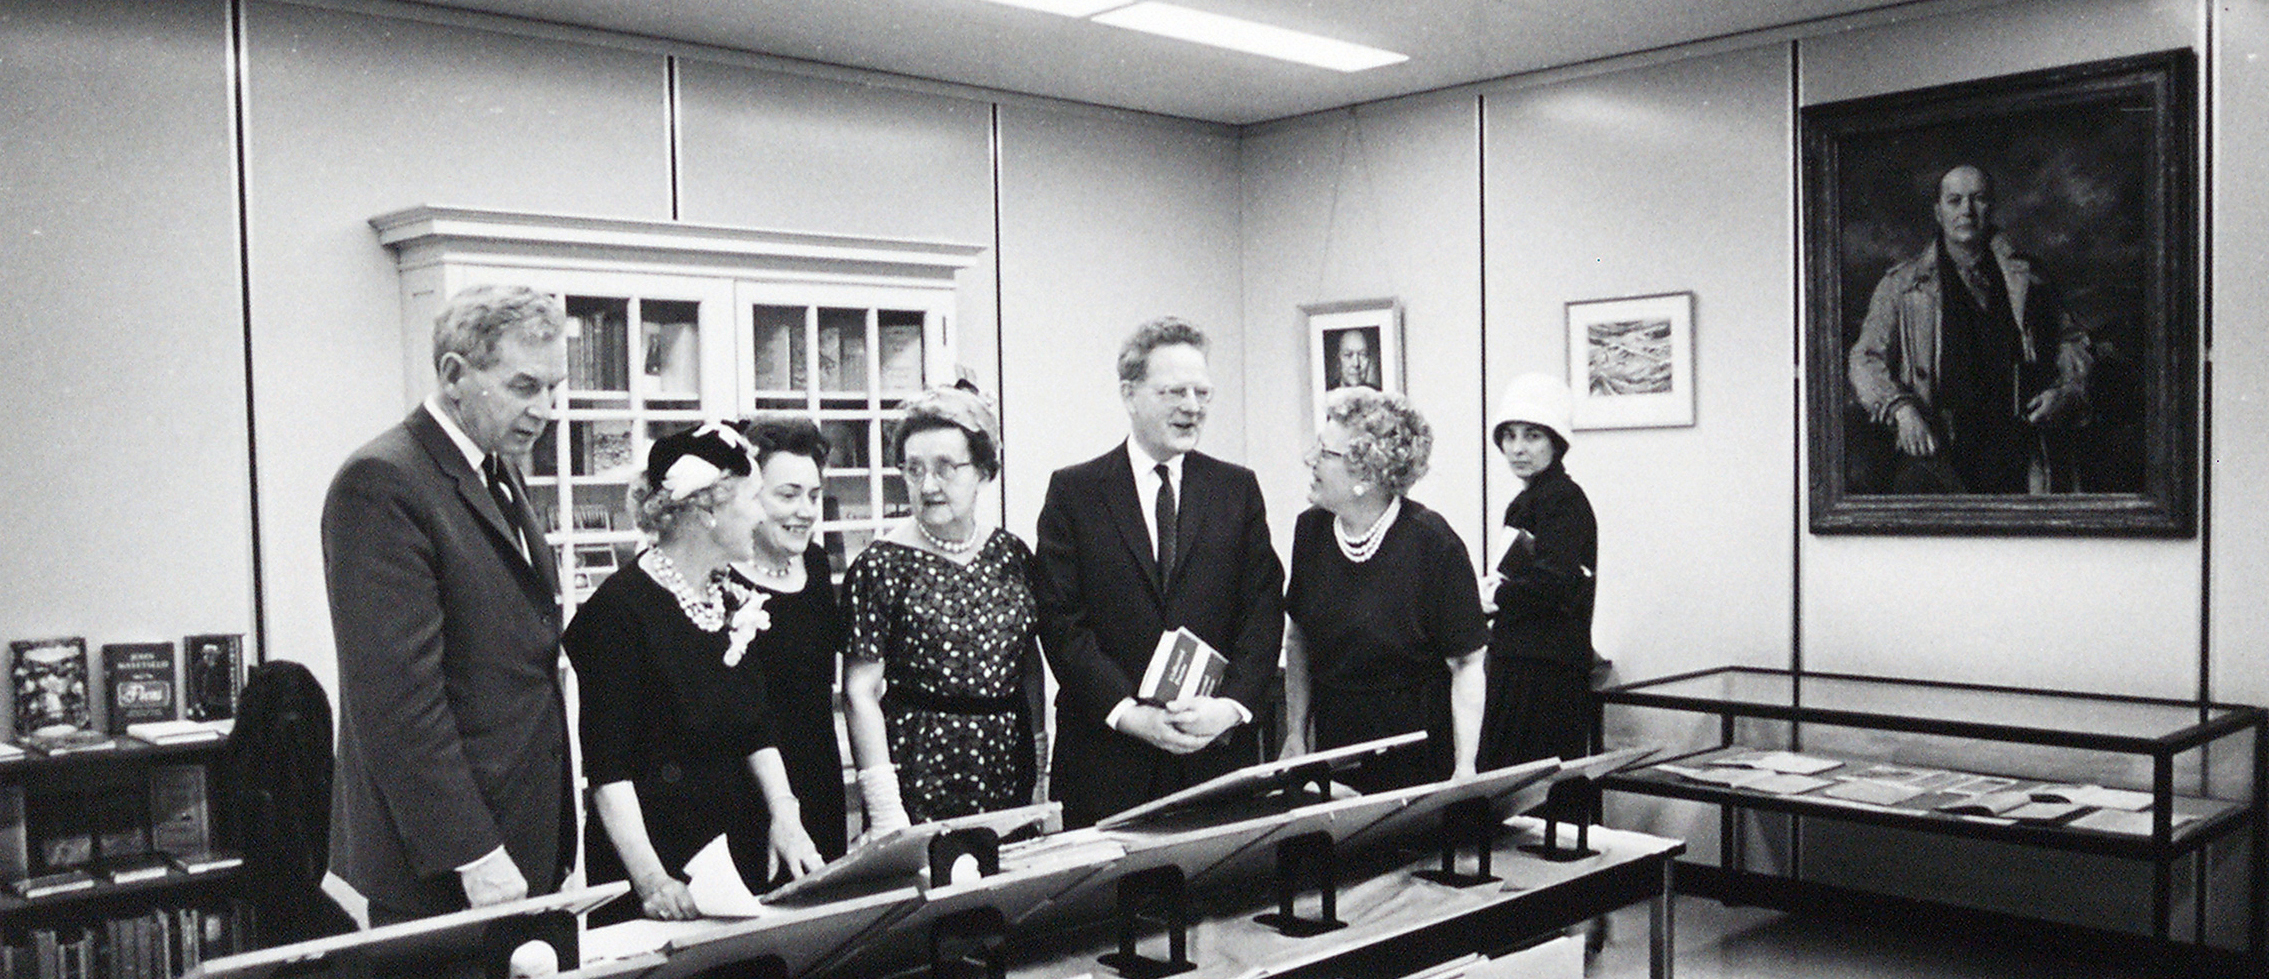 Northrop Frye at the the dedication of the E.J. Pratt Room of Contemporary Poetry on 15 October, 1964 in Victoria University Library. Looking at the exhibit are President A.B.B. Moore, Viola Whitney Pratt, Claire Pratt, Florence Pratt, Principal Frye with the Librarian Margaret Ray